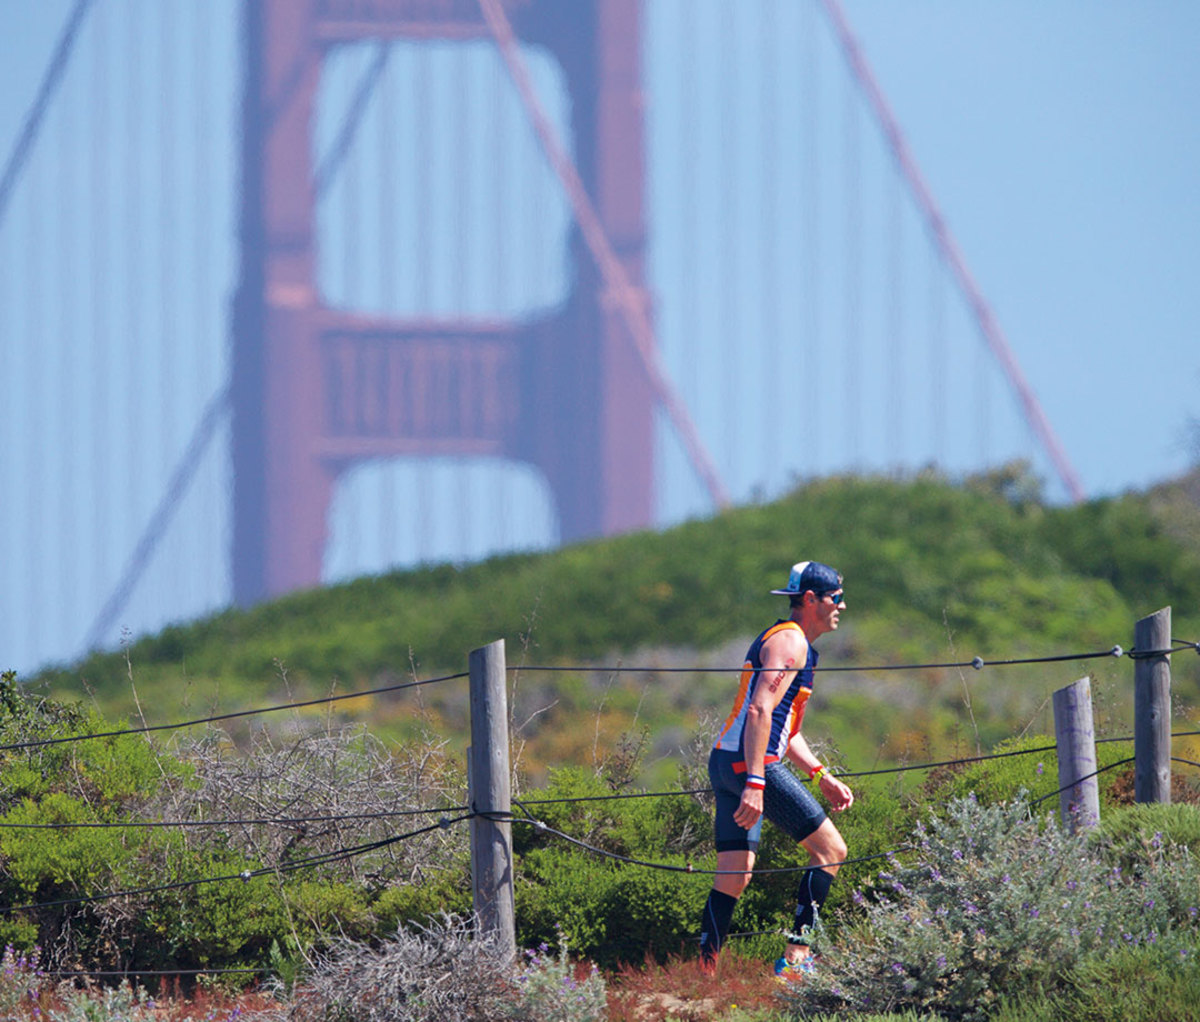 Runner walking up Sand Ladder with San Francisco Bridge in the background.